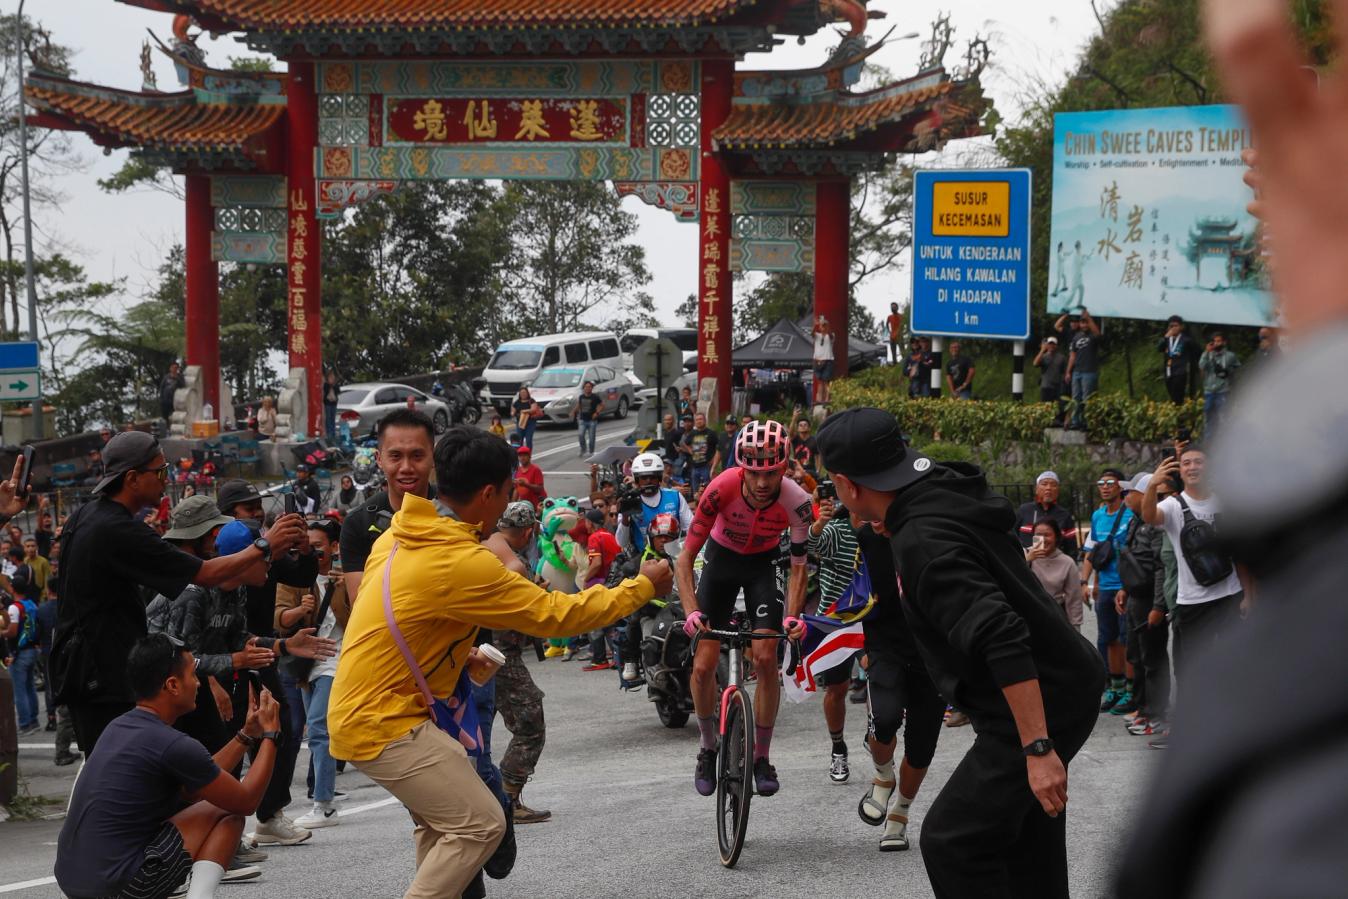 The crowds always provide an incredible spectacle at the Tour de Langkawi